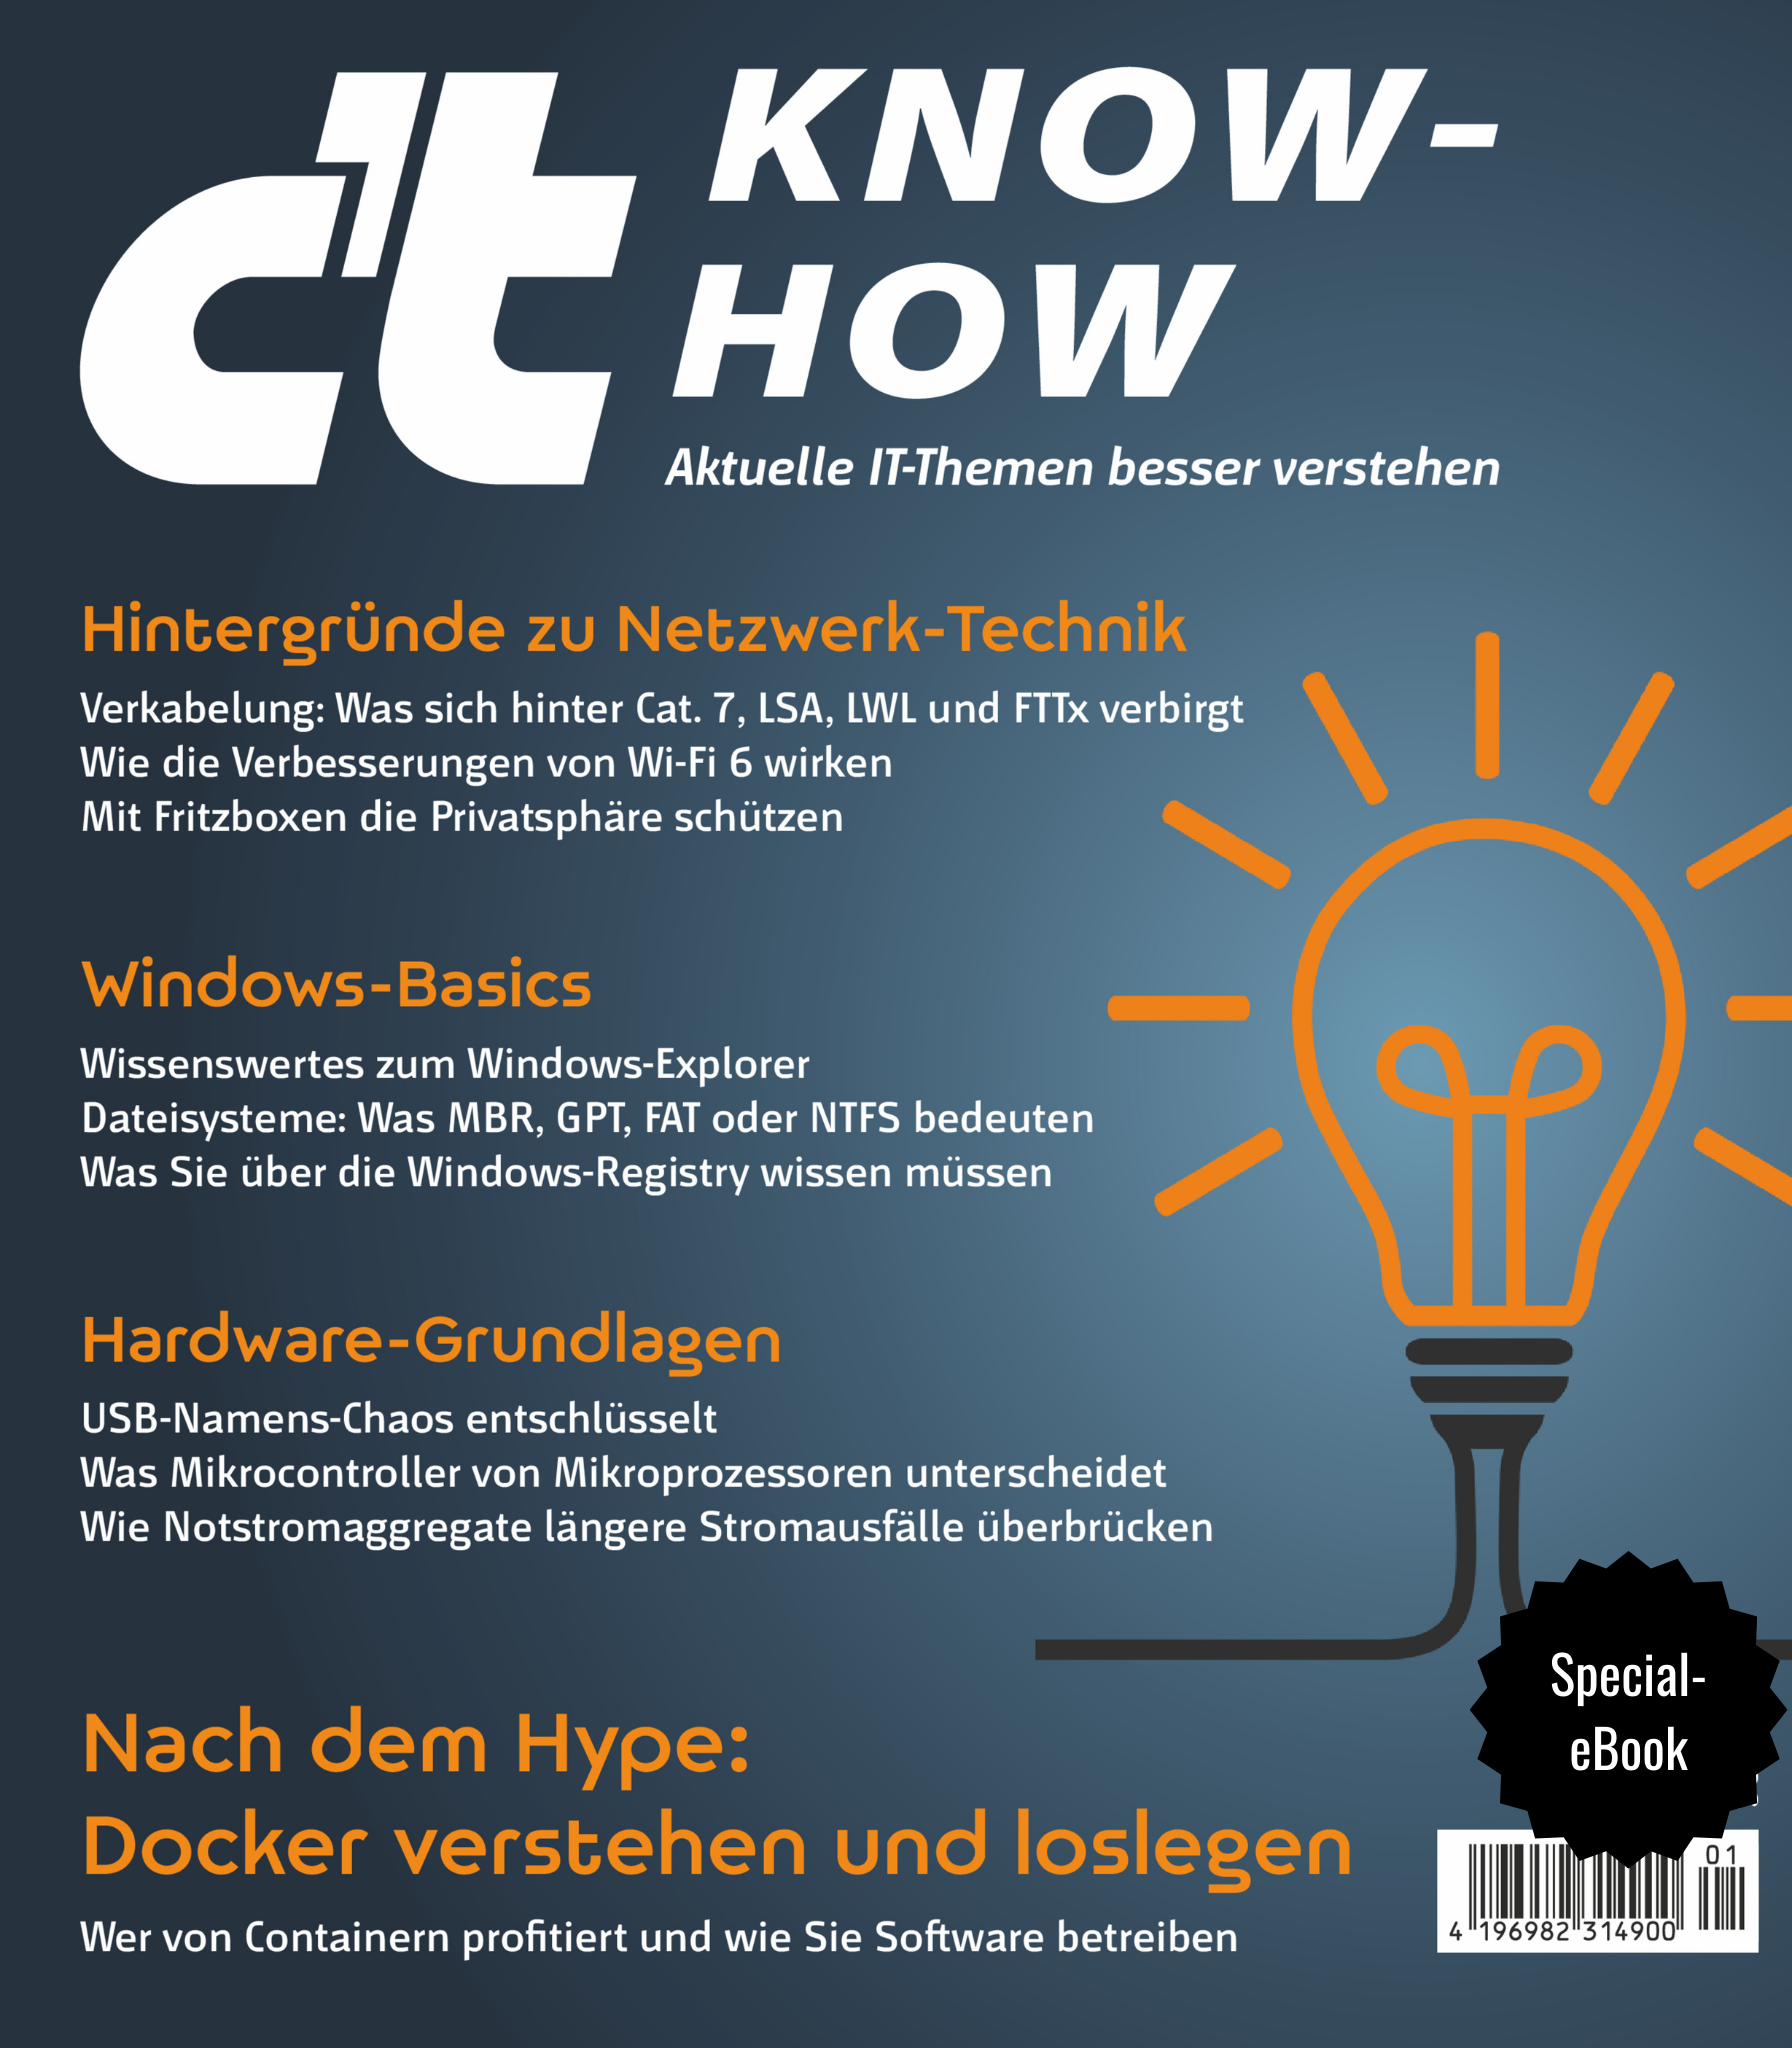 c't Know-How 2022 (Special-eBook)